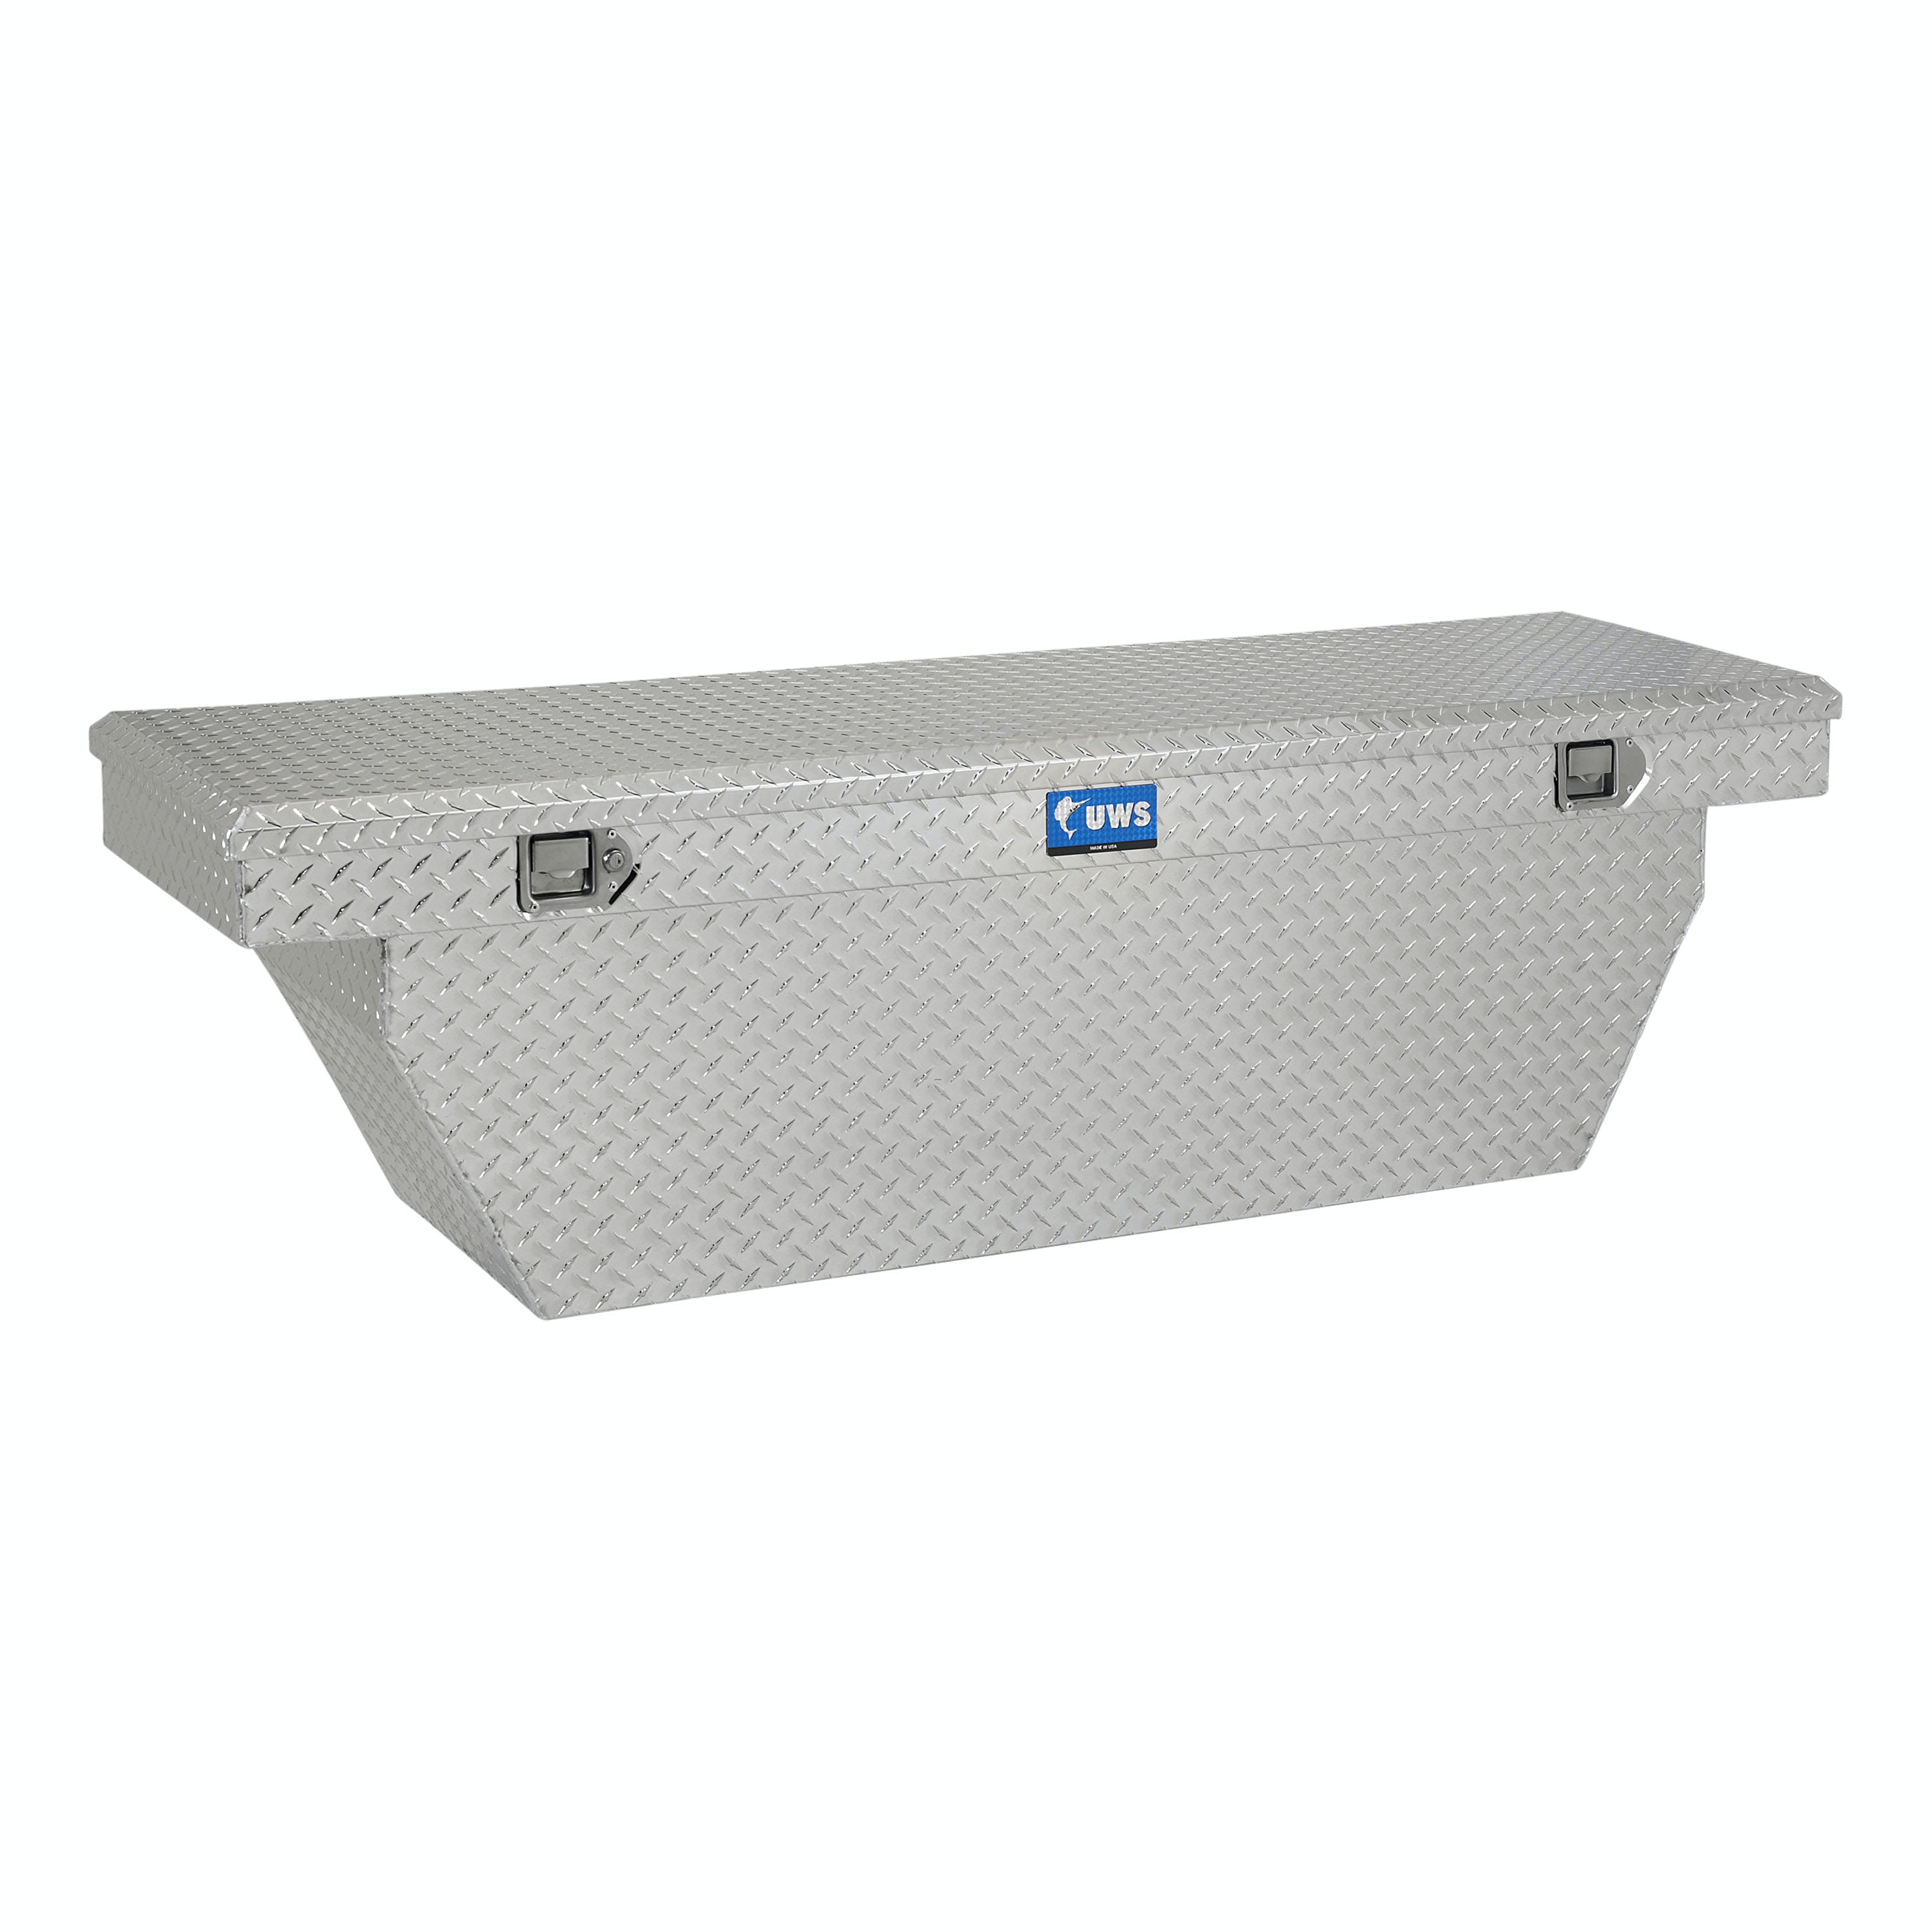 UWS TBSD-69-A 69 inch Aluminum Single Lid Crossover Toolbox Deep Angled